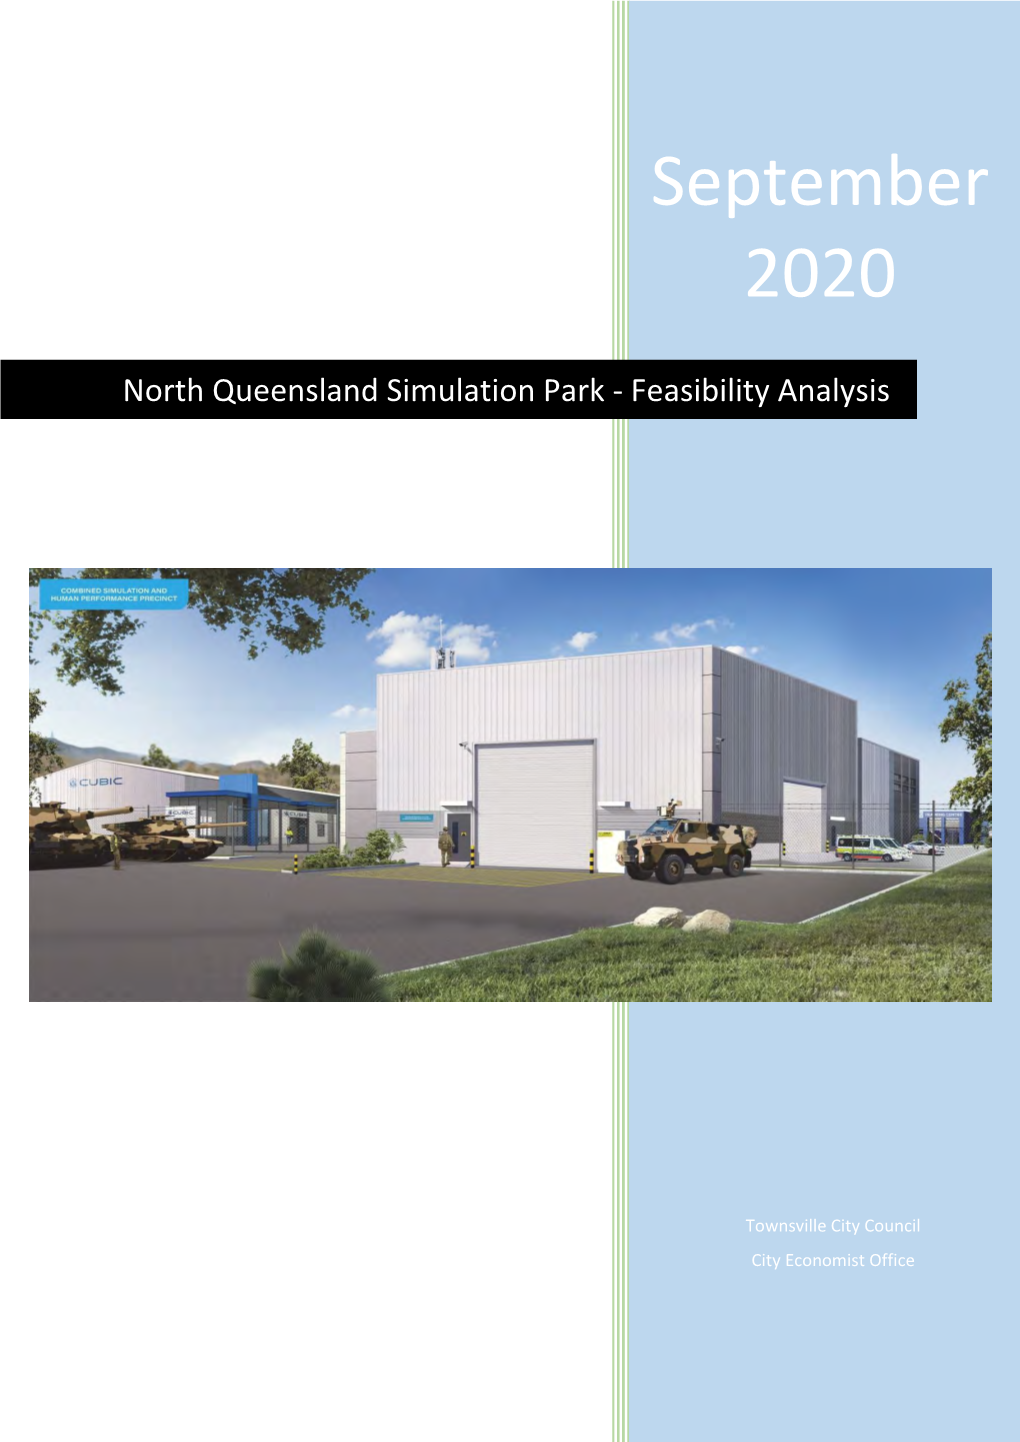 North Queensland Simulation Park - Feasibility Analysis